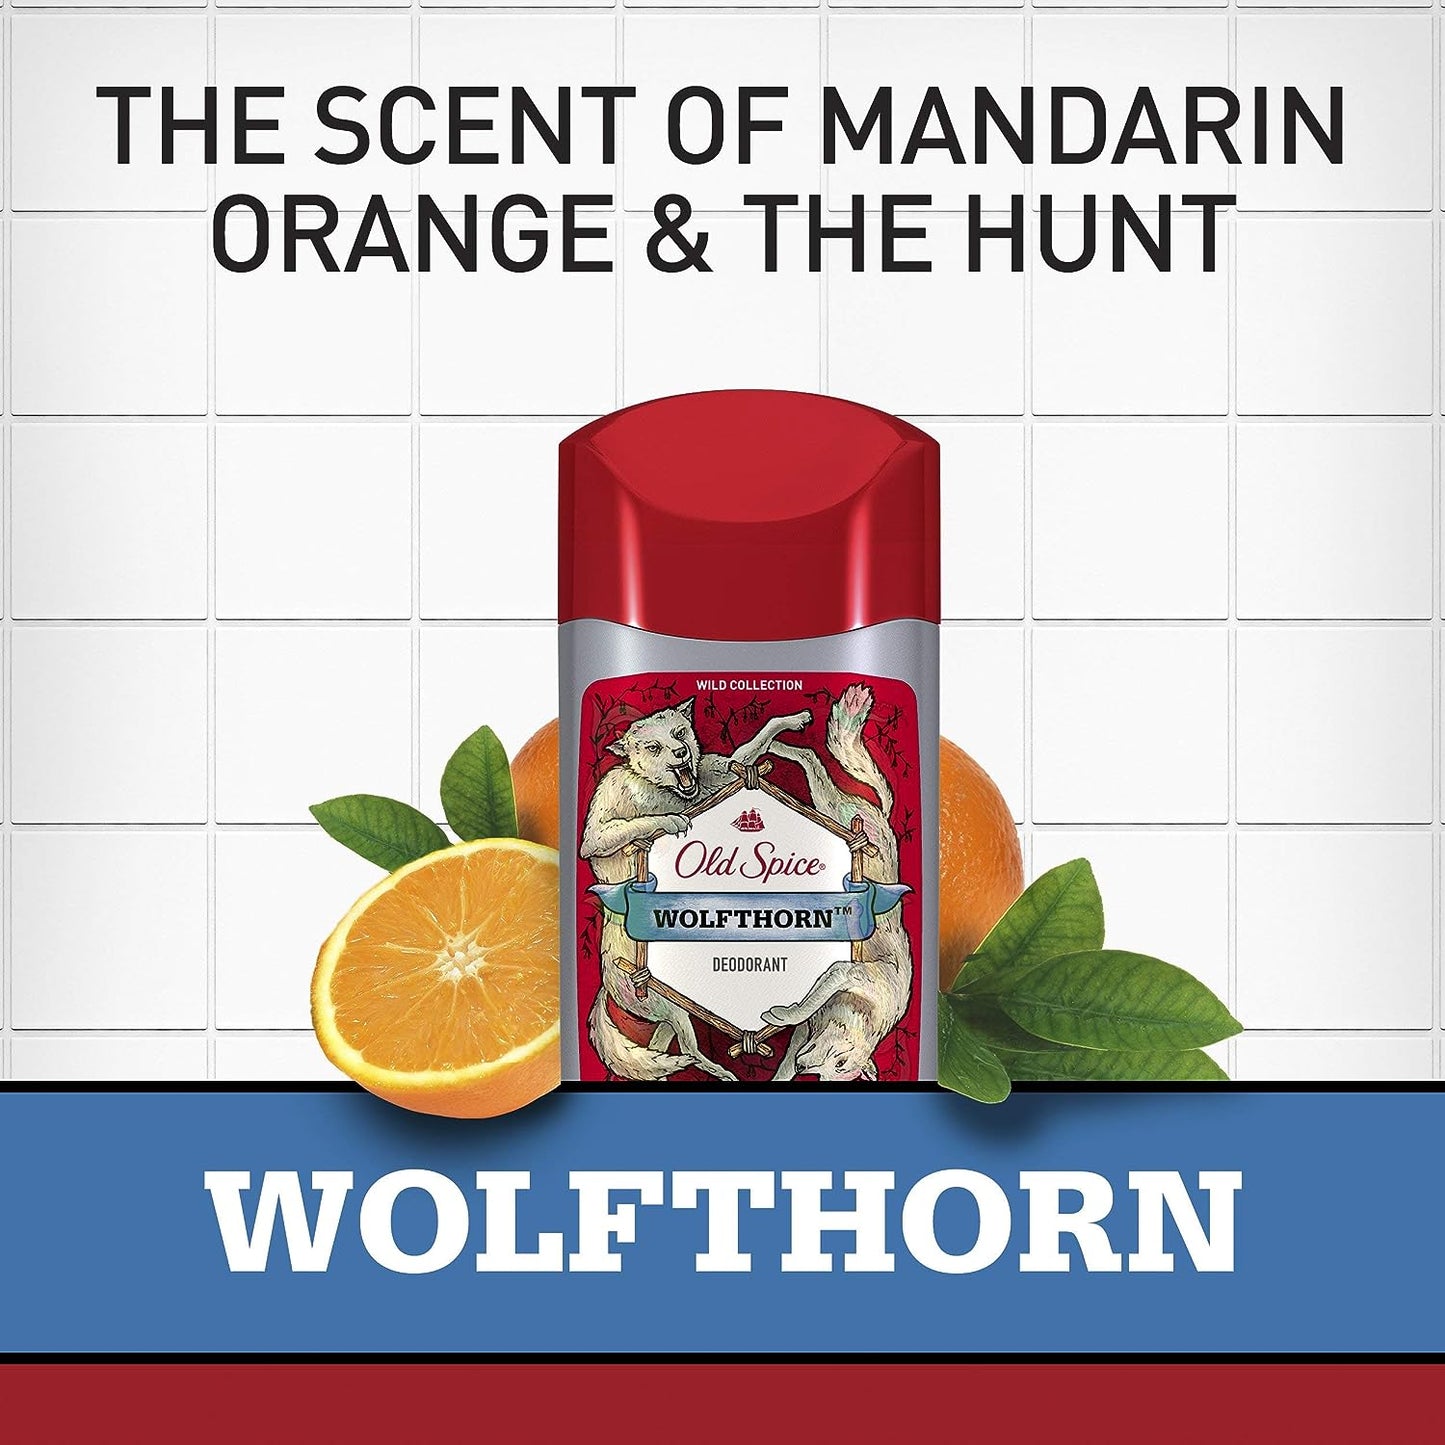 Old Spice Deodorant for Men, Wolfthorn Scent, Wild Collection, 3 oz, (Pack of 3)